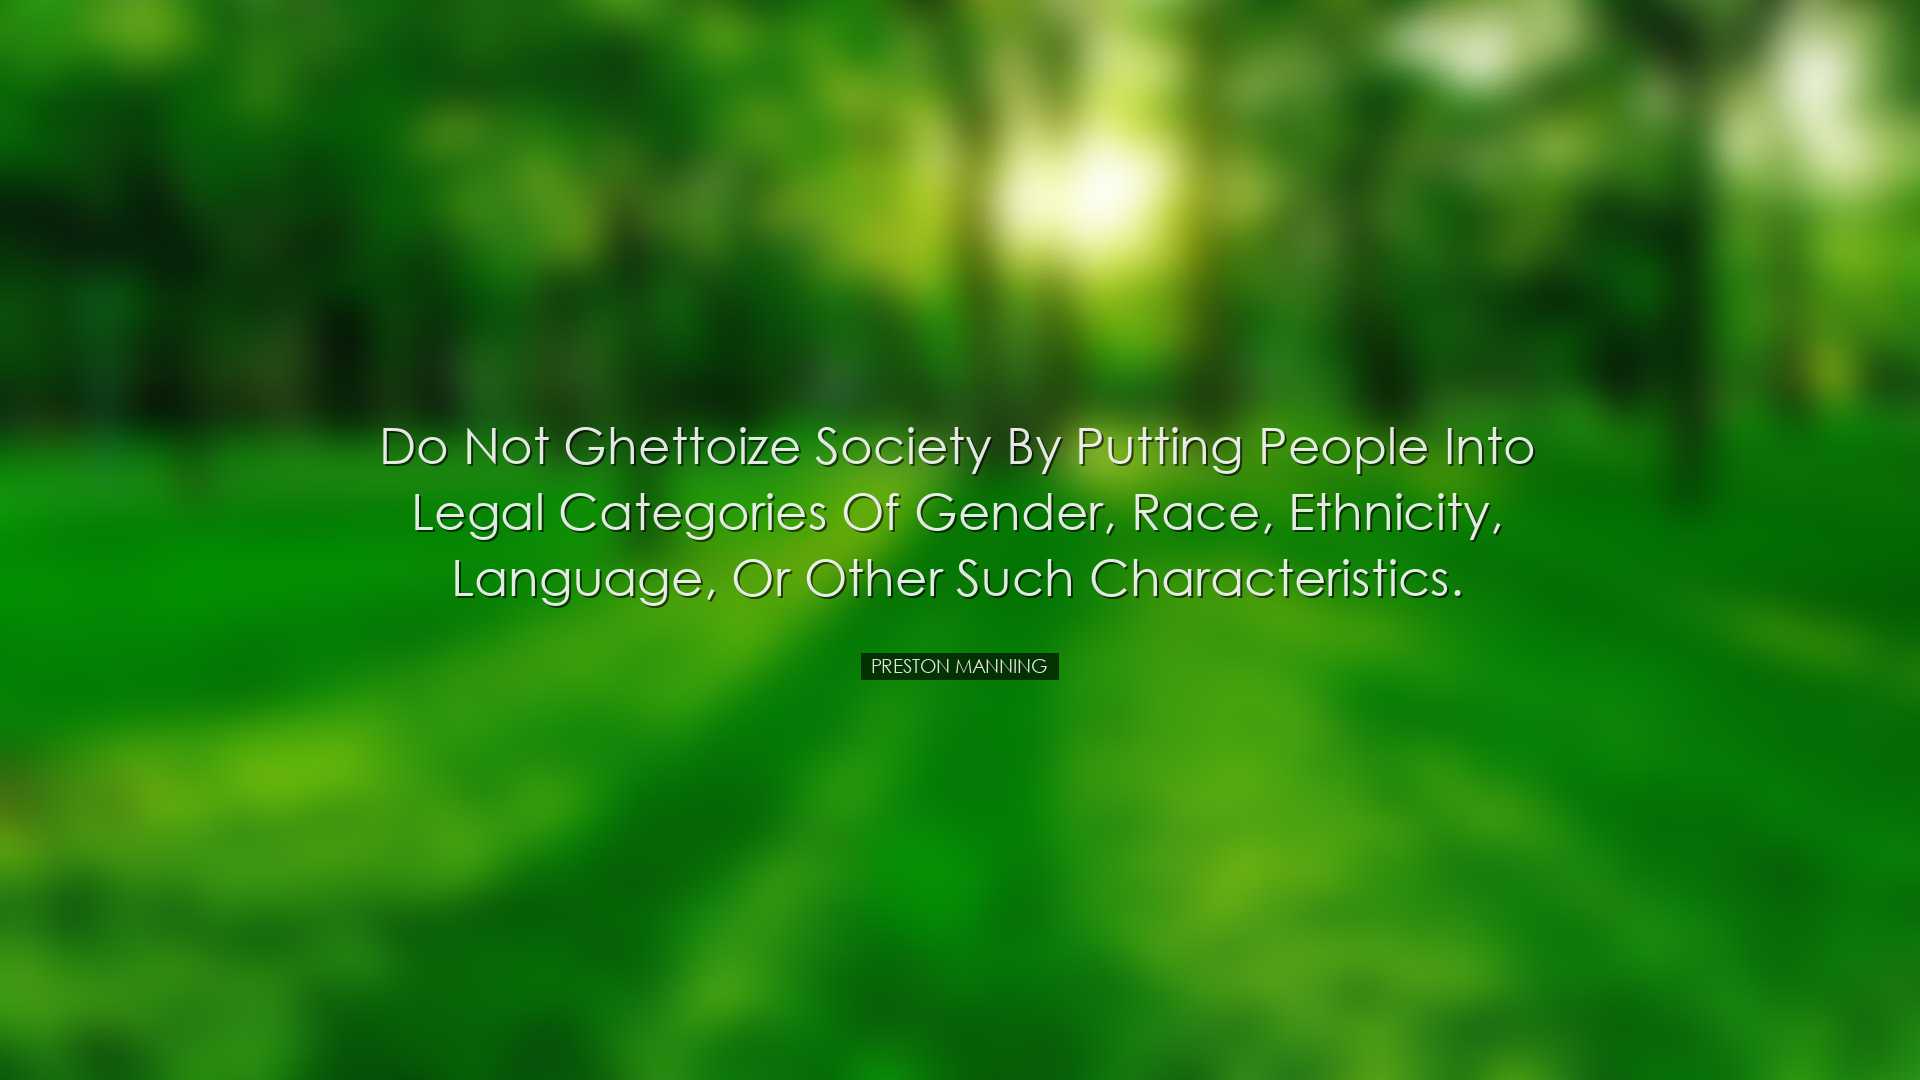 Do not ghettoize society by putting people into legal categories o